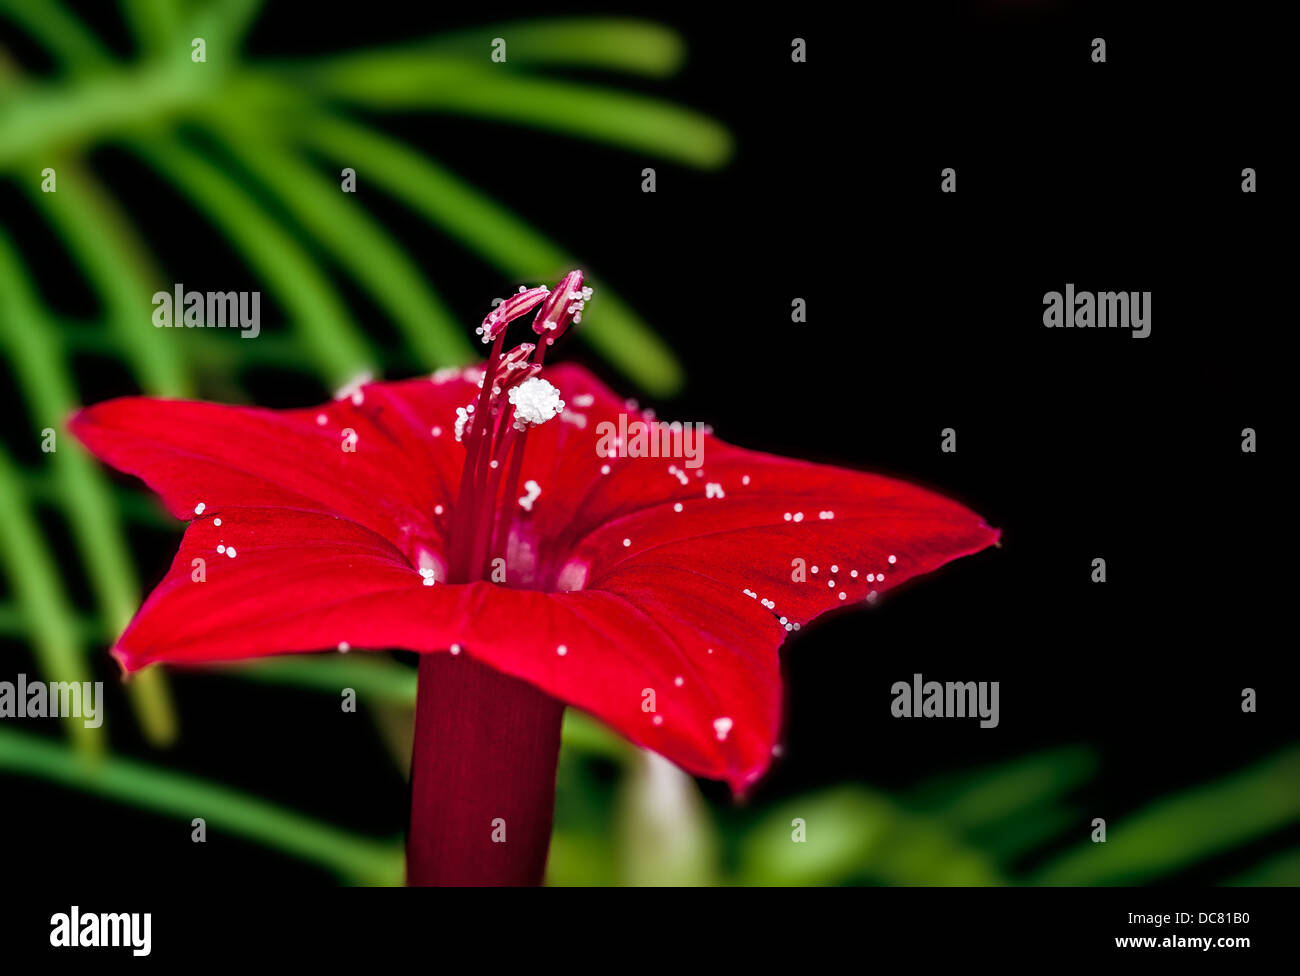 Ipomoea quamoclit, cypress vine, flower, red, isolated on black background, pollens scattered on the red petals Stock Photo